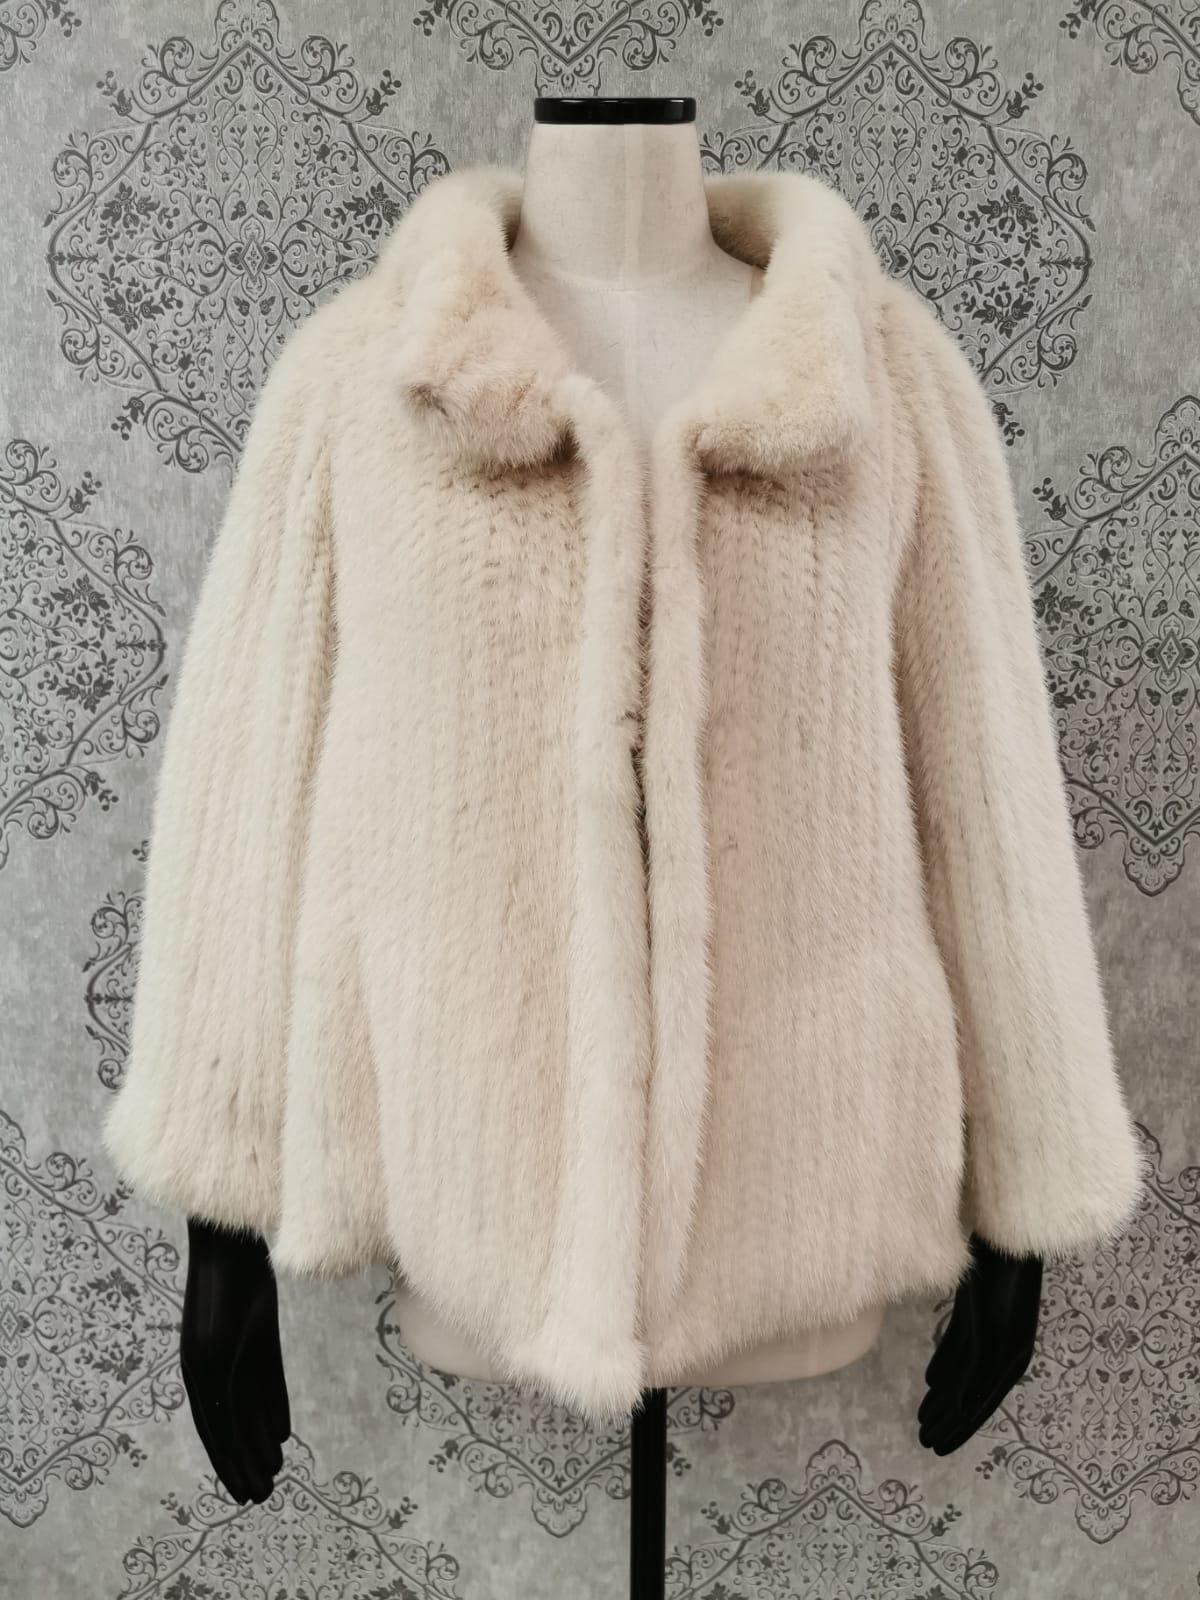 DESCRIPTION: 56 Brand new knitted Bisang white cream mink fur coat size 10

short collar, supple skins, beautiful fresh fur, european german clasps for closure, too slit pockets, nice big full pelts skins in excellent condition.

Brand: Bizang
Made